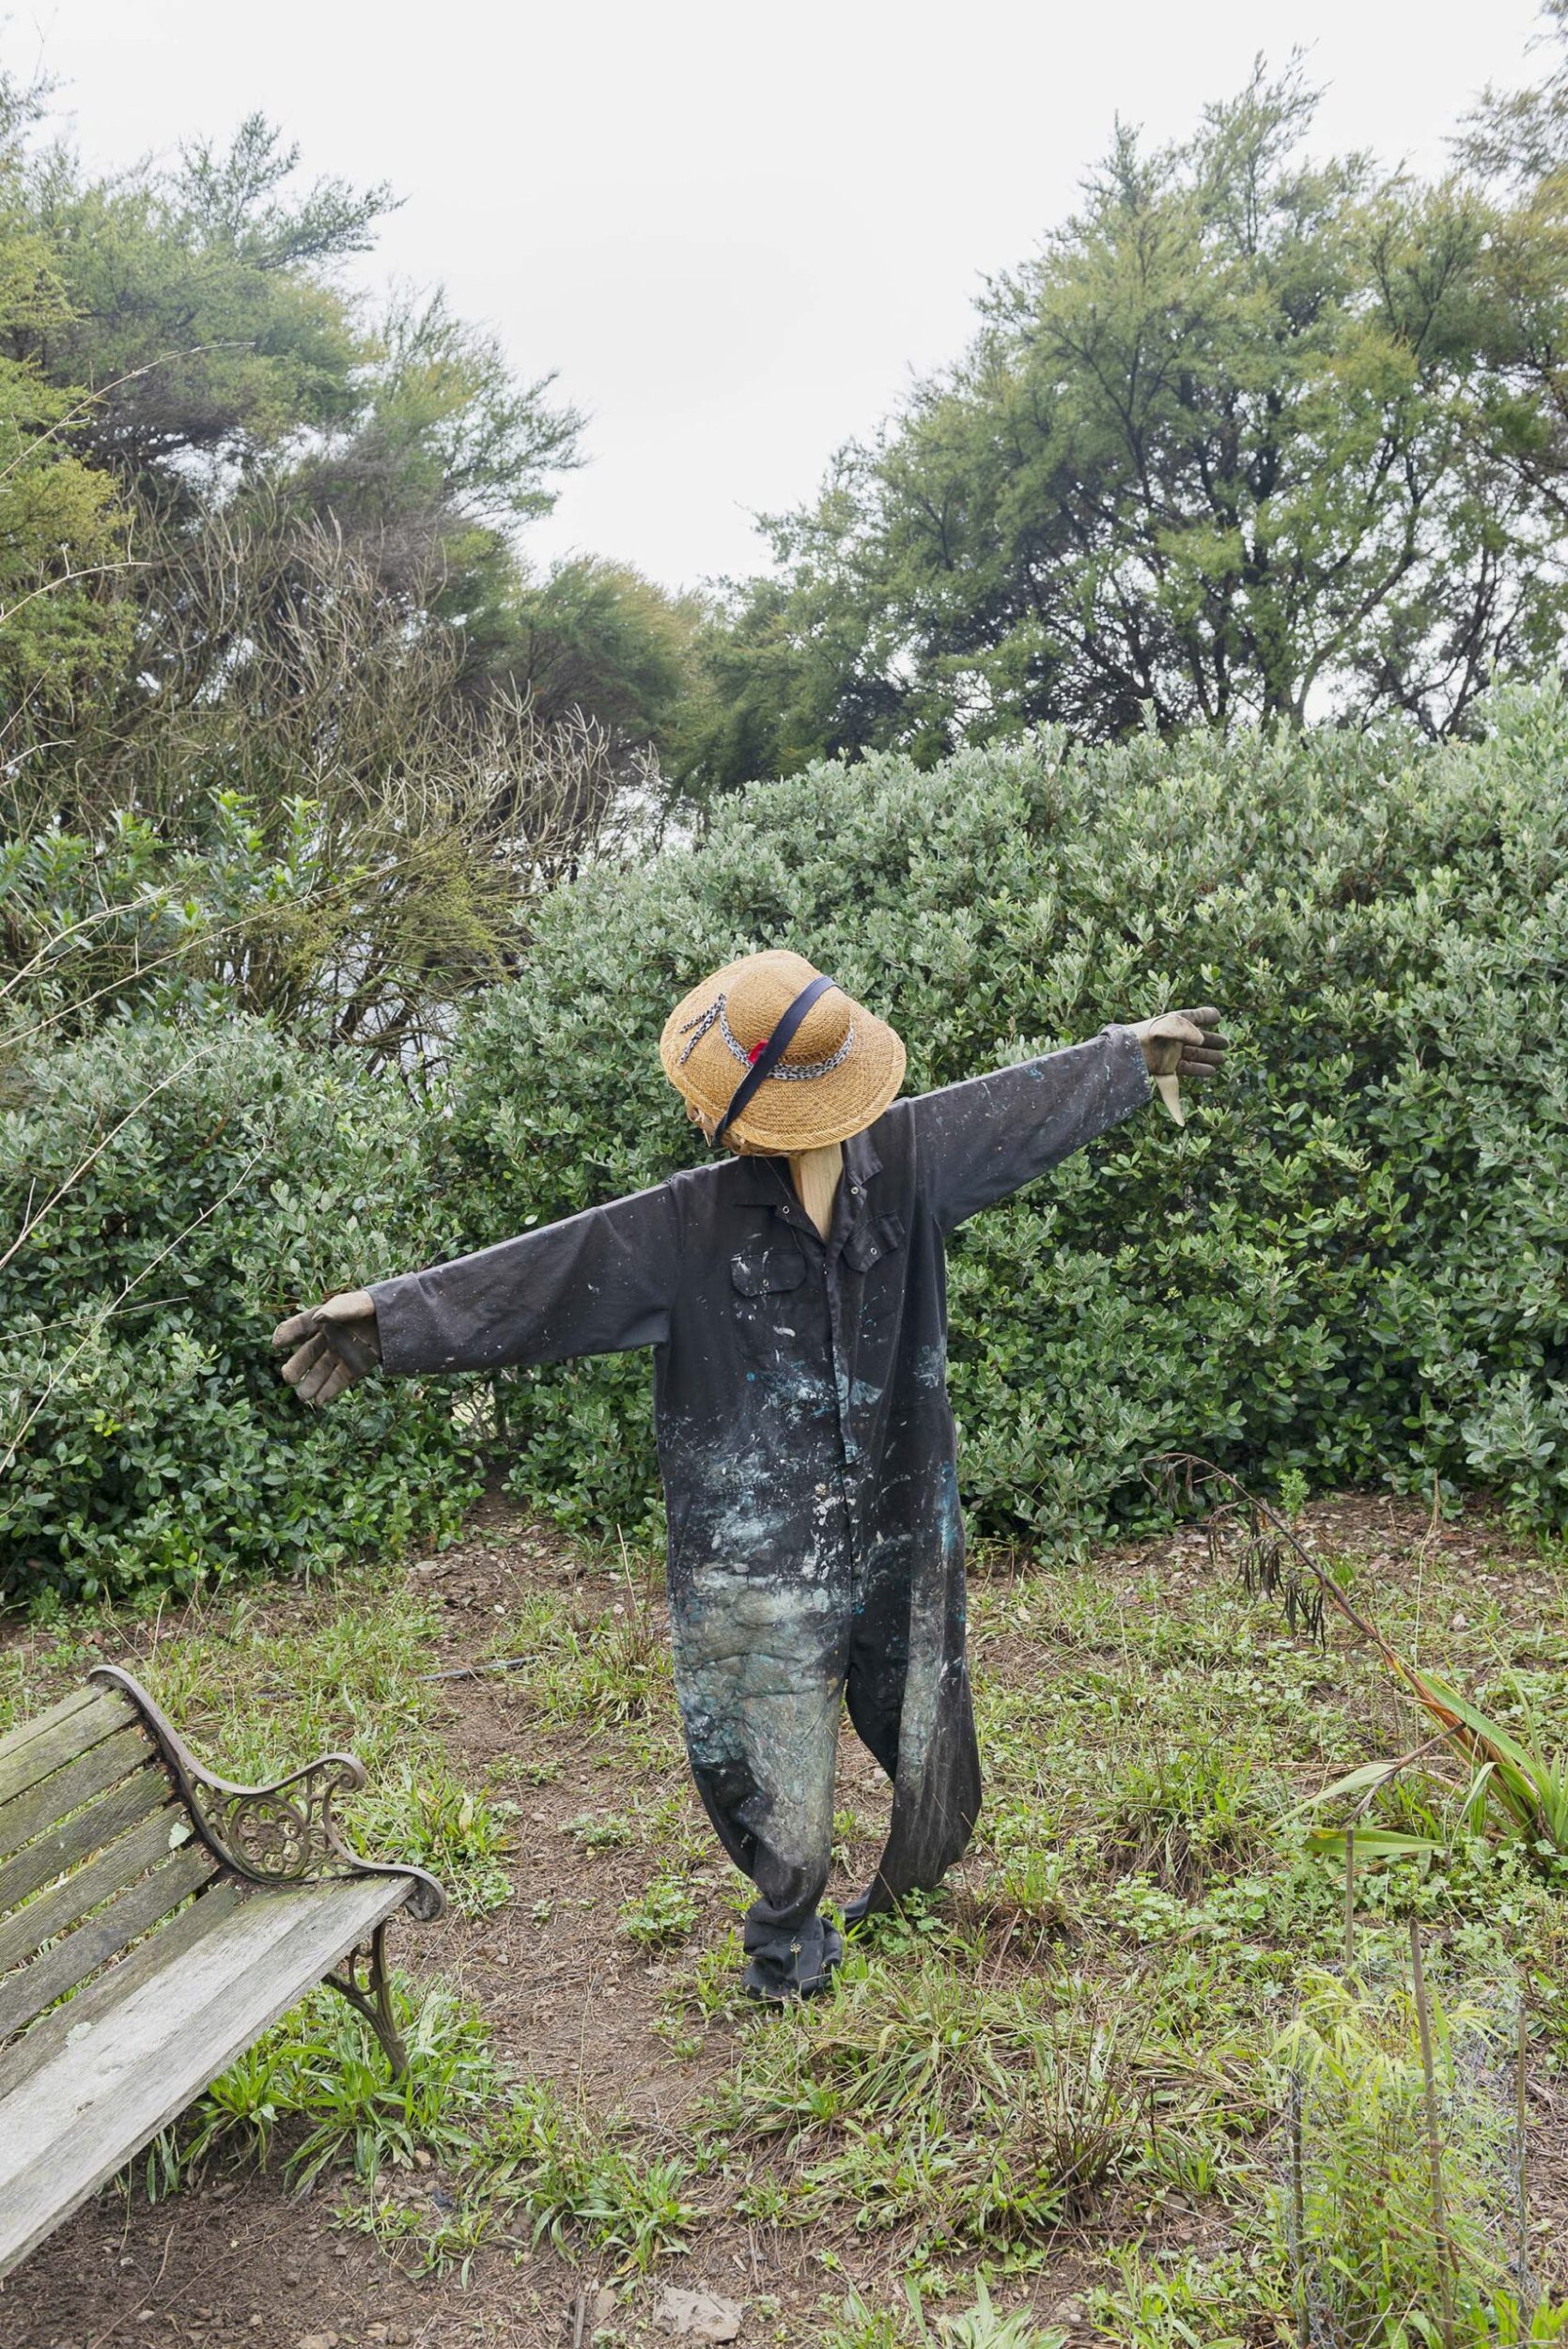 A scarecrow made out of a black paint splattered jumpsuit and a straw hat